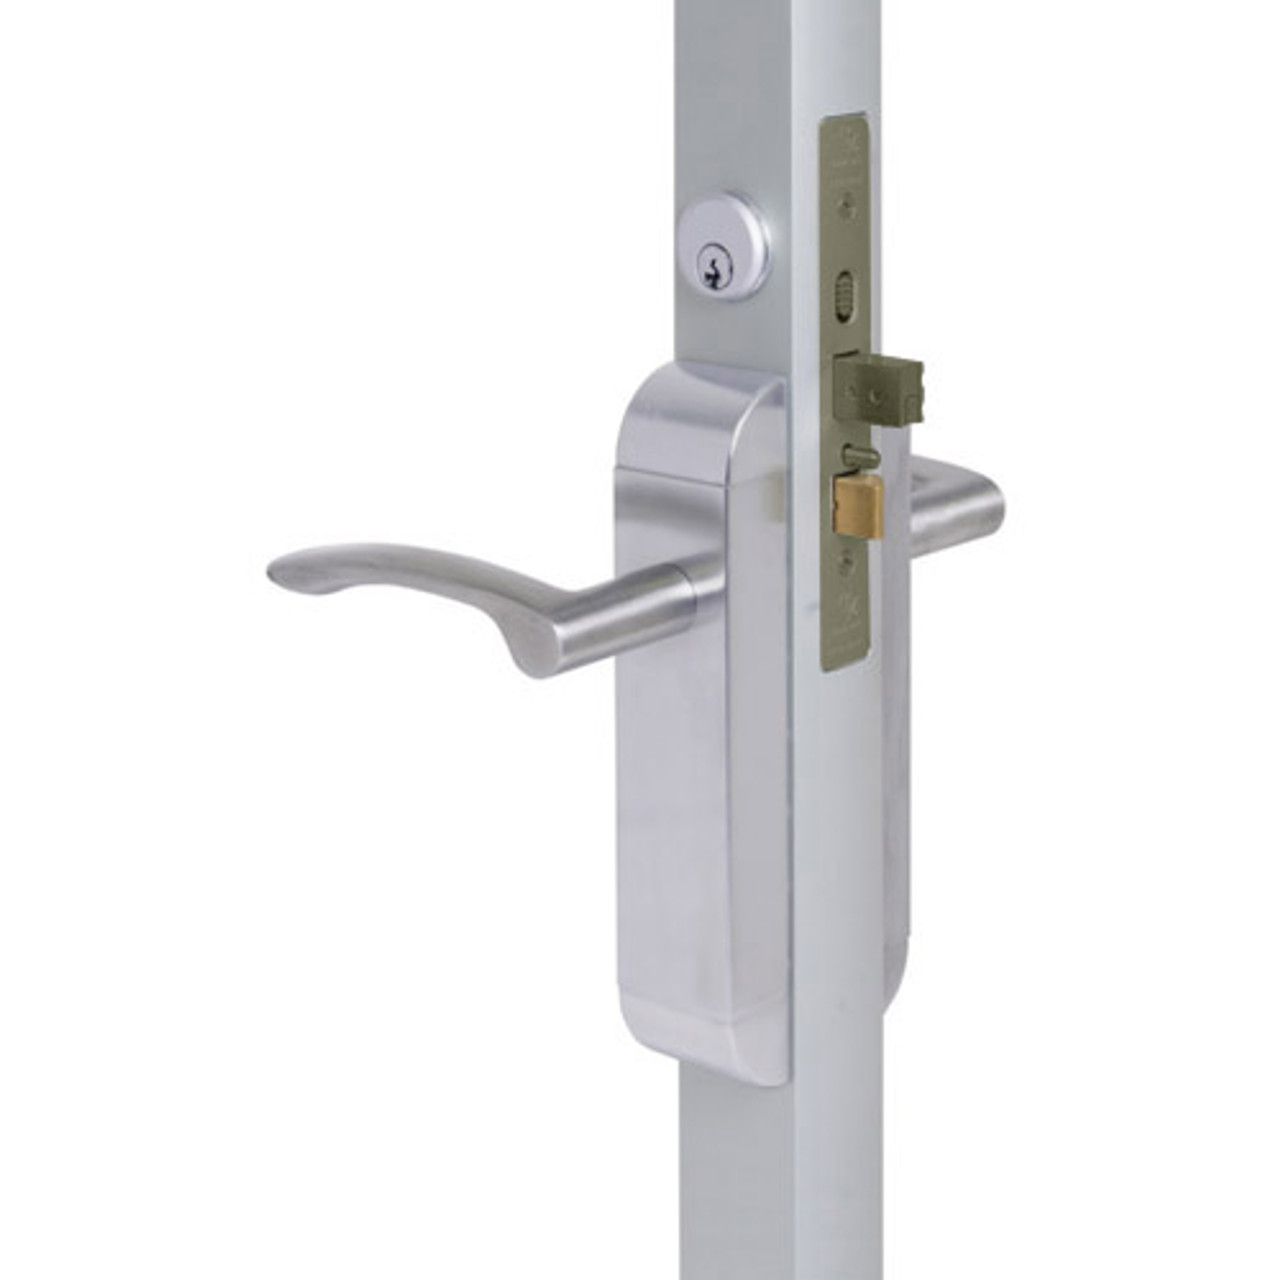 2190-322-301-32 Adams Rite Dual Force Interconnected 2190 series Deadlock/Deadlatch in Bright Stainless